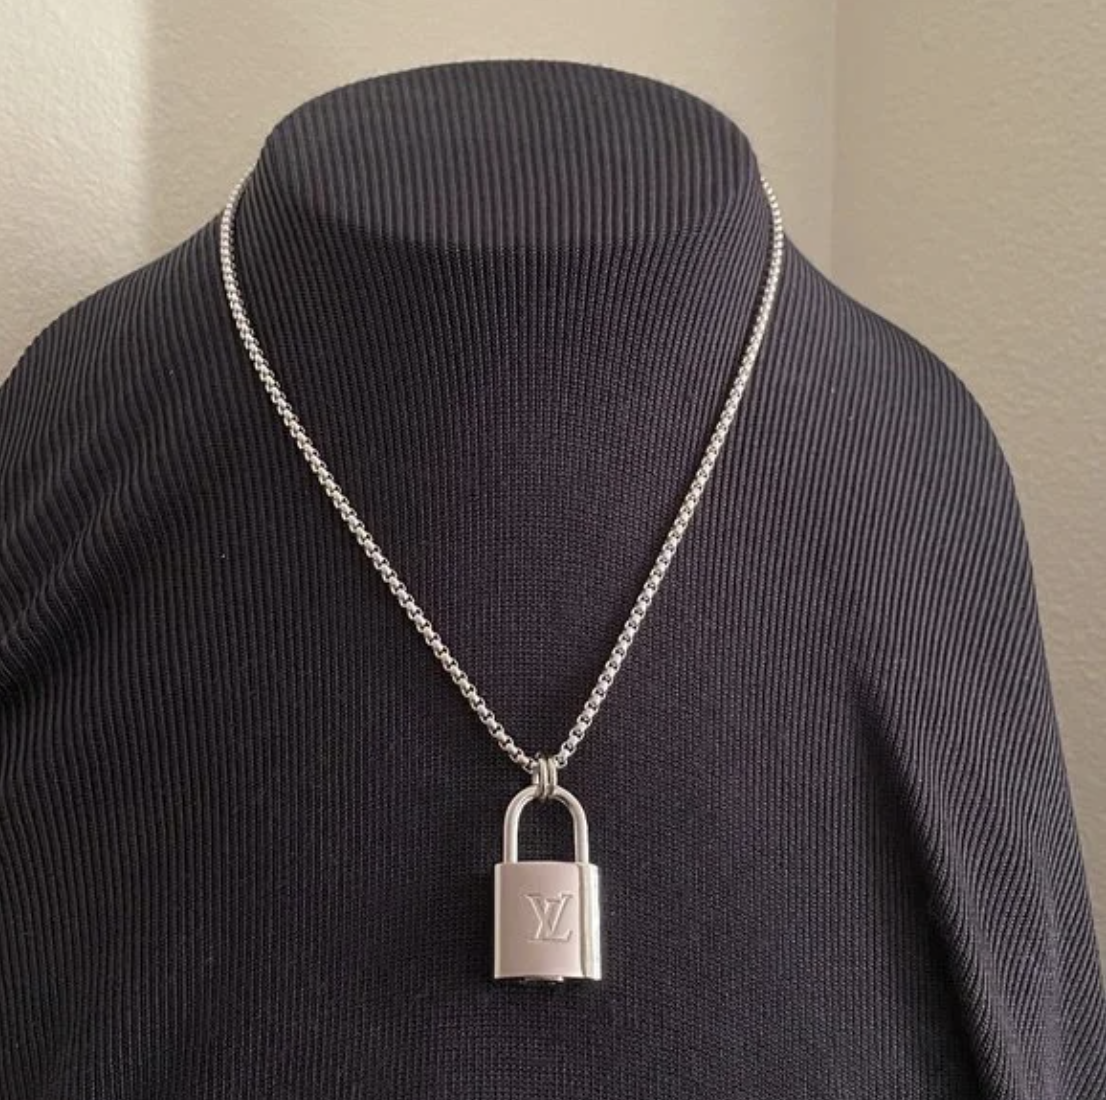 New Louis Vuitton Silver-Toned Lock on 20 Box Link Chain Necklace